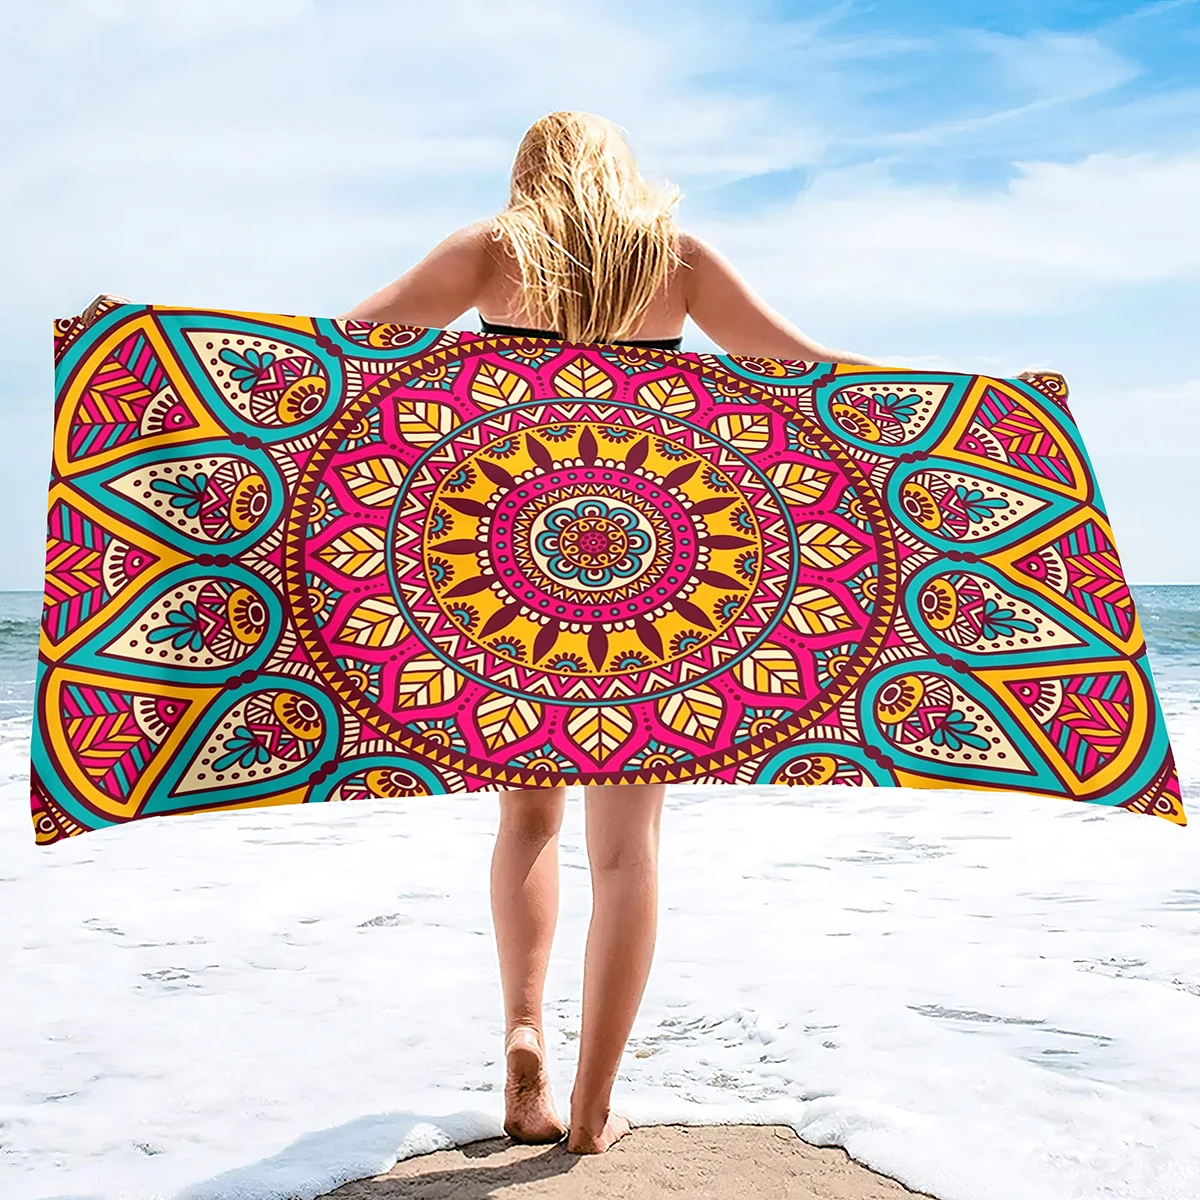 

Oversize Beach Towel Clearance Towels,Extra Large Boho Mandala,Travel Pool Towel,Sand Free Quick Dry Travel Towels for Travel